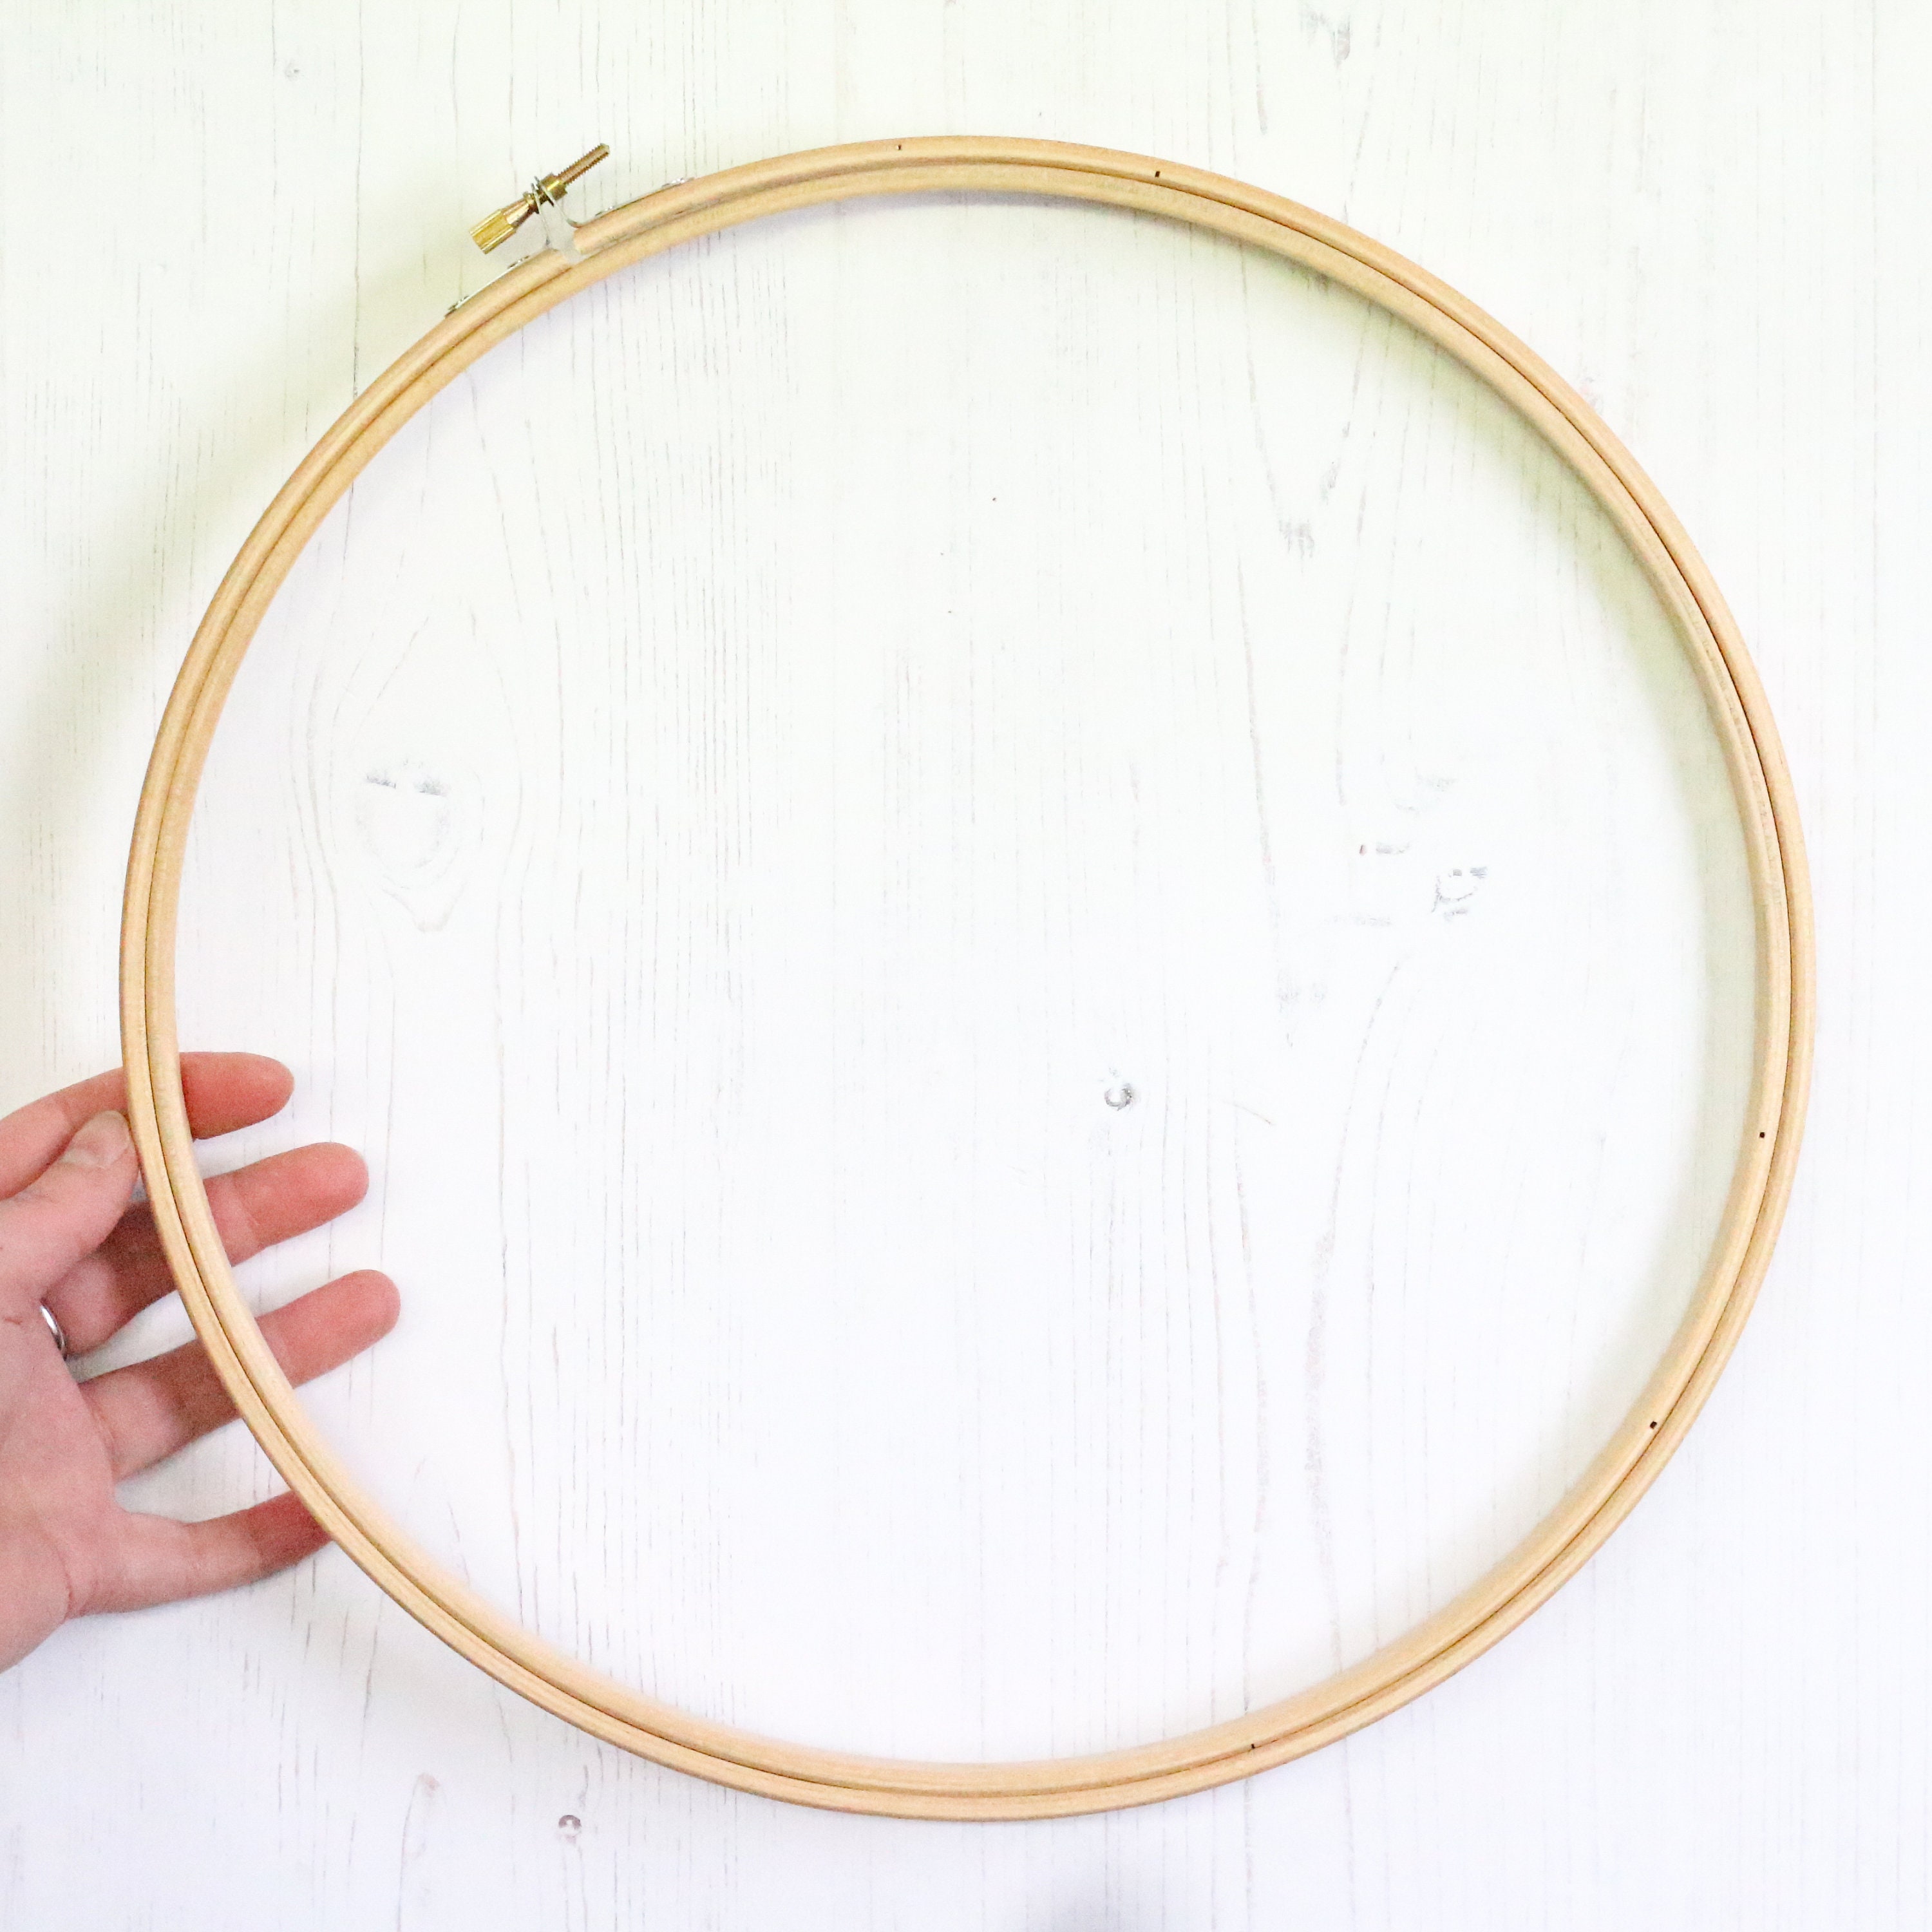 Extra Large Embroidery Hoop - 8 x 12 - SA447 Hoop Works for